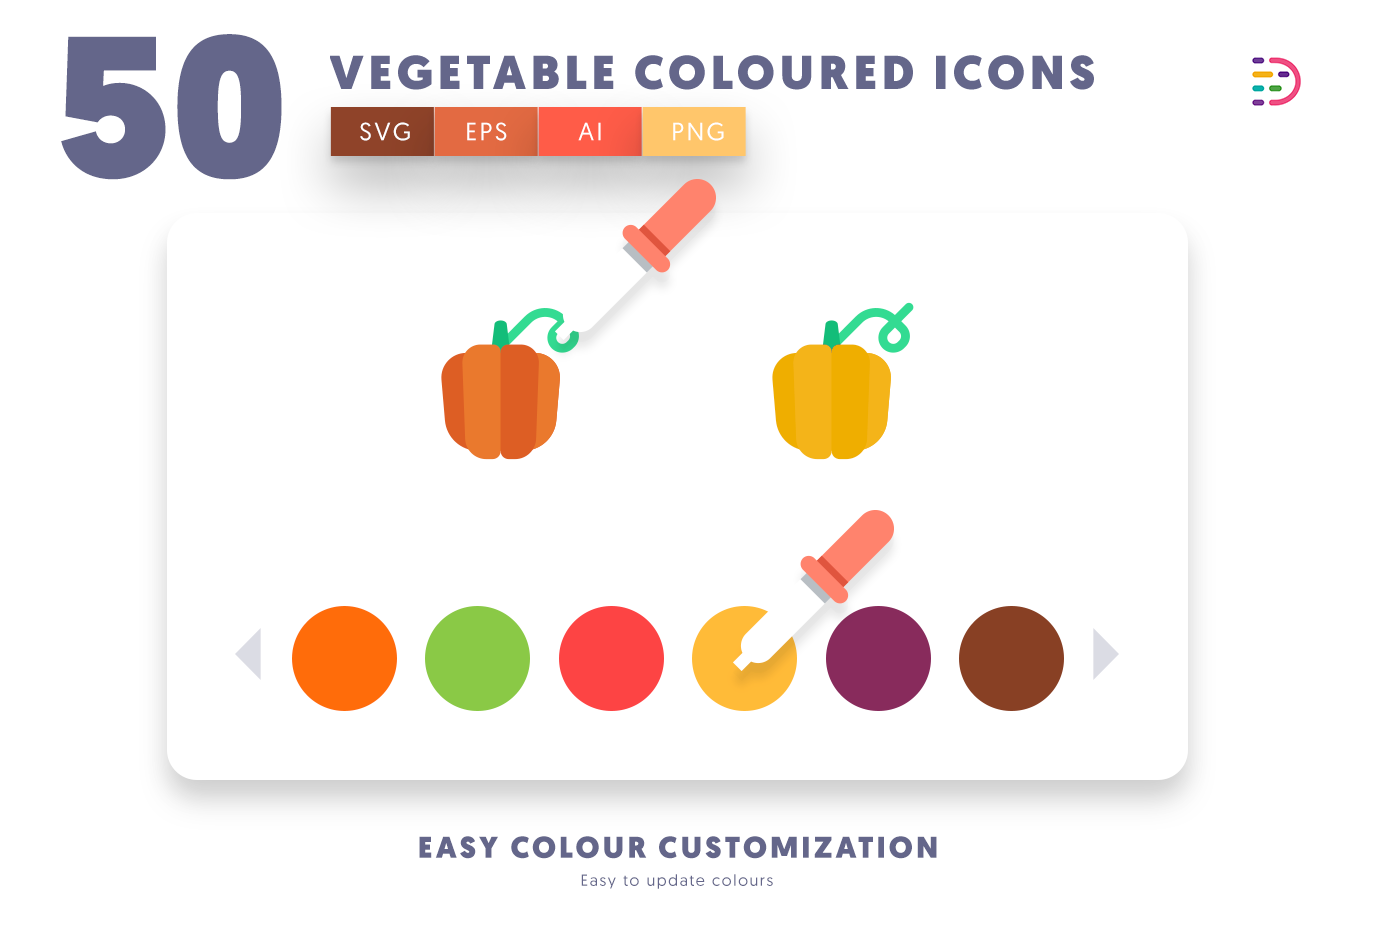 Customizable and vector 50 Vegetable Coloured Icons